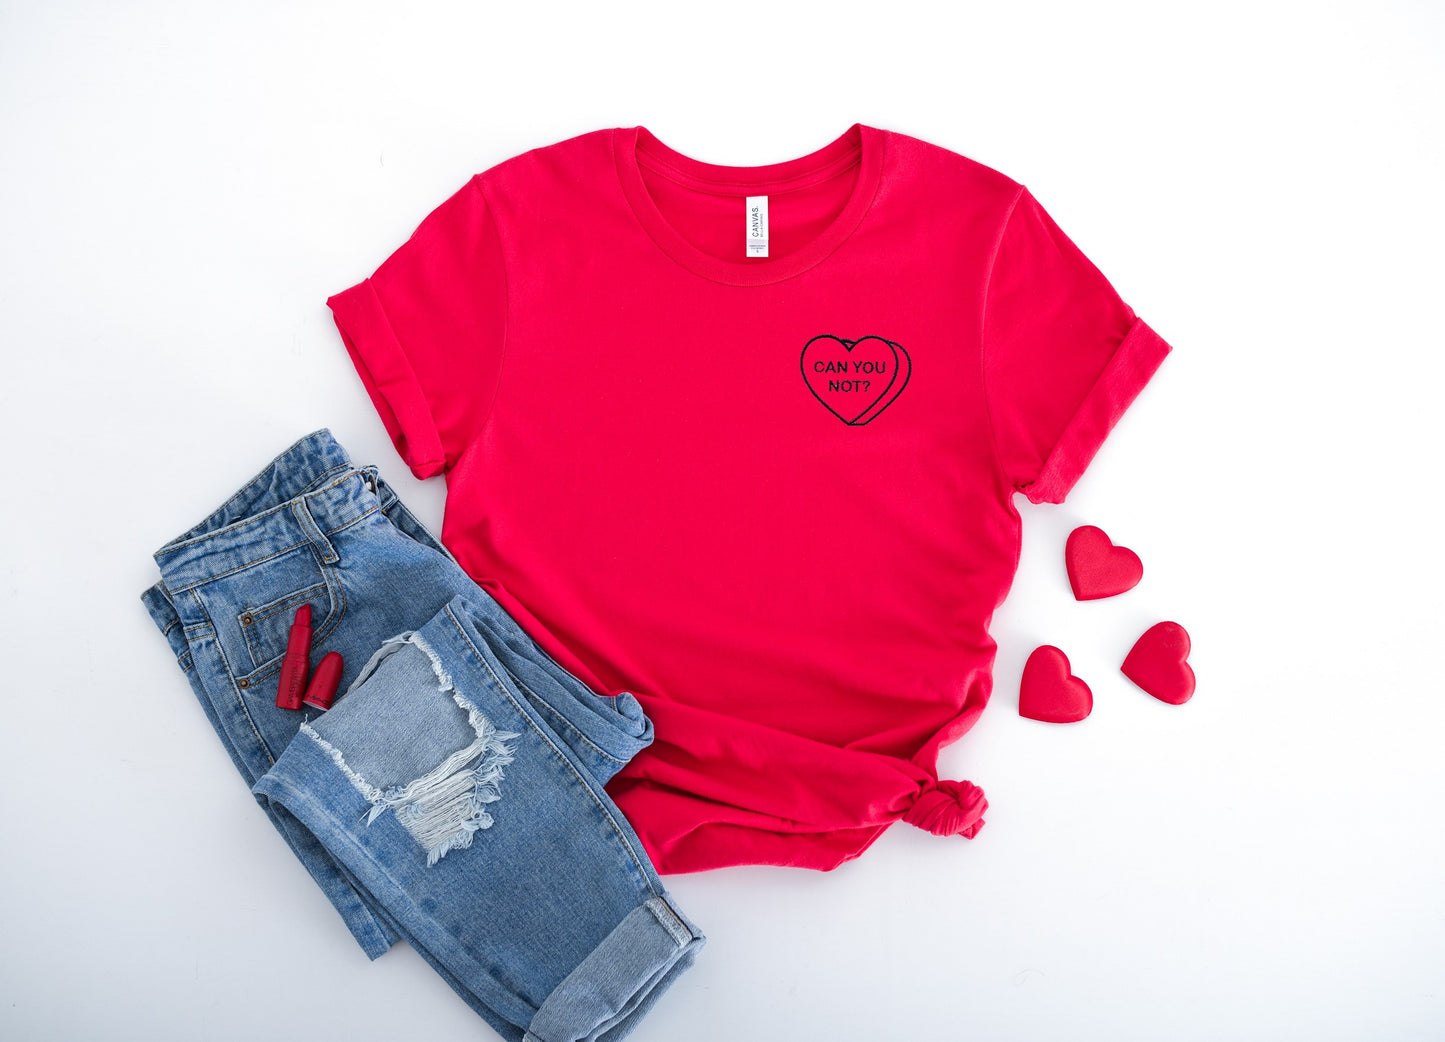 Can You Not? Conversation Heart Black Tee